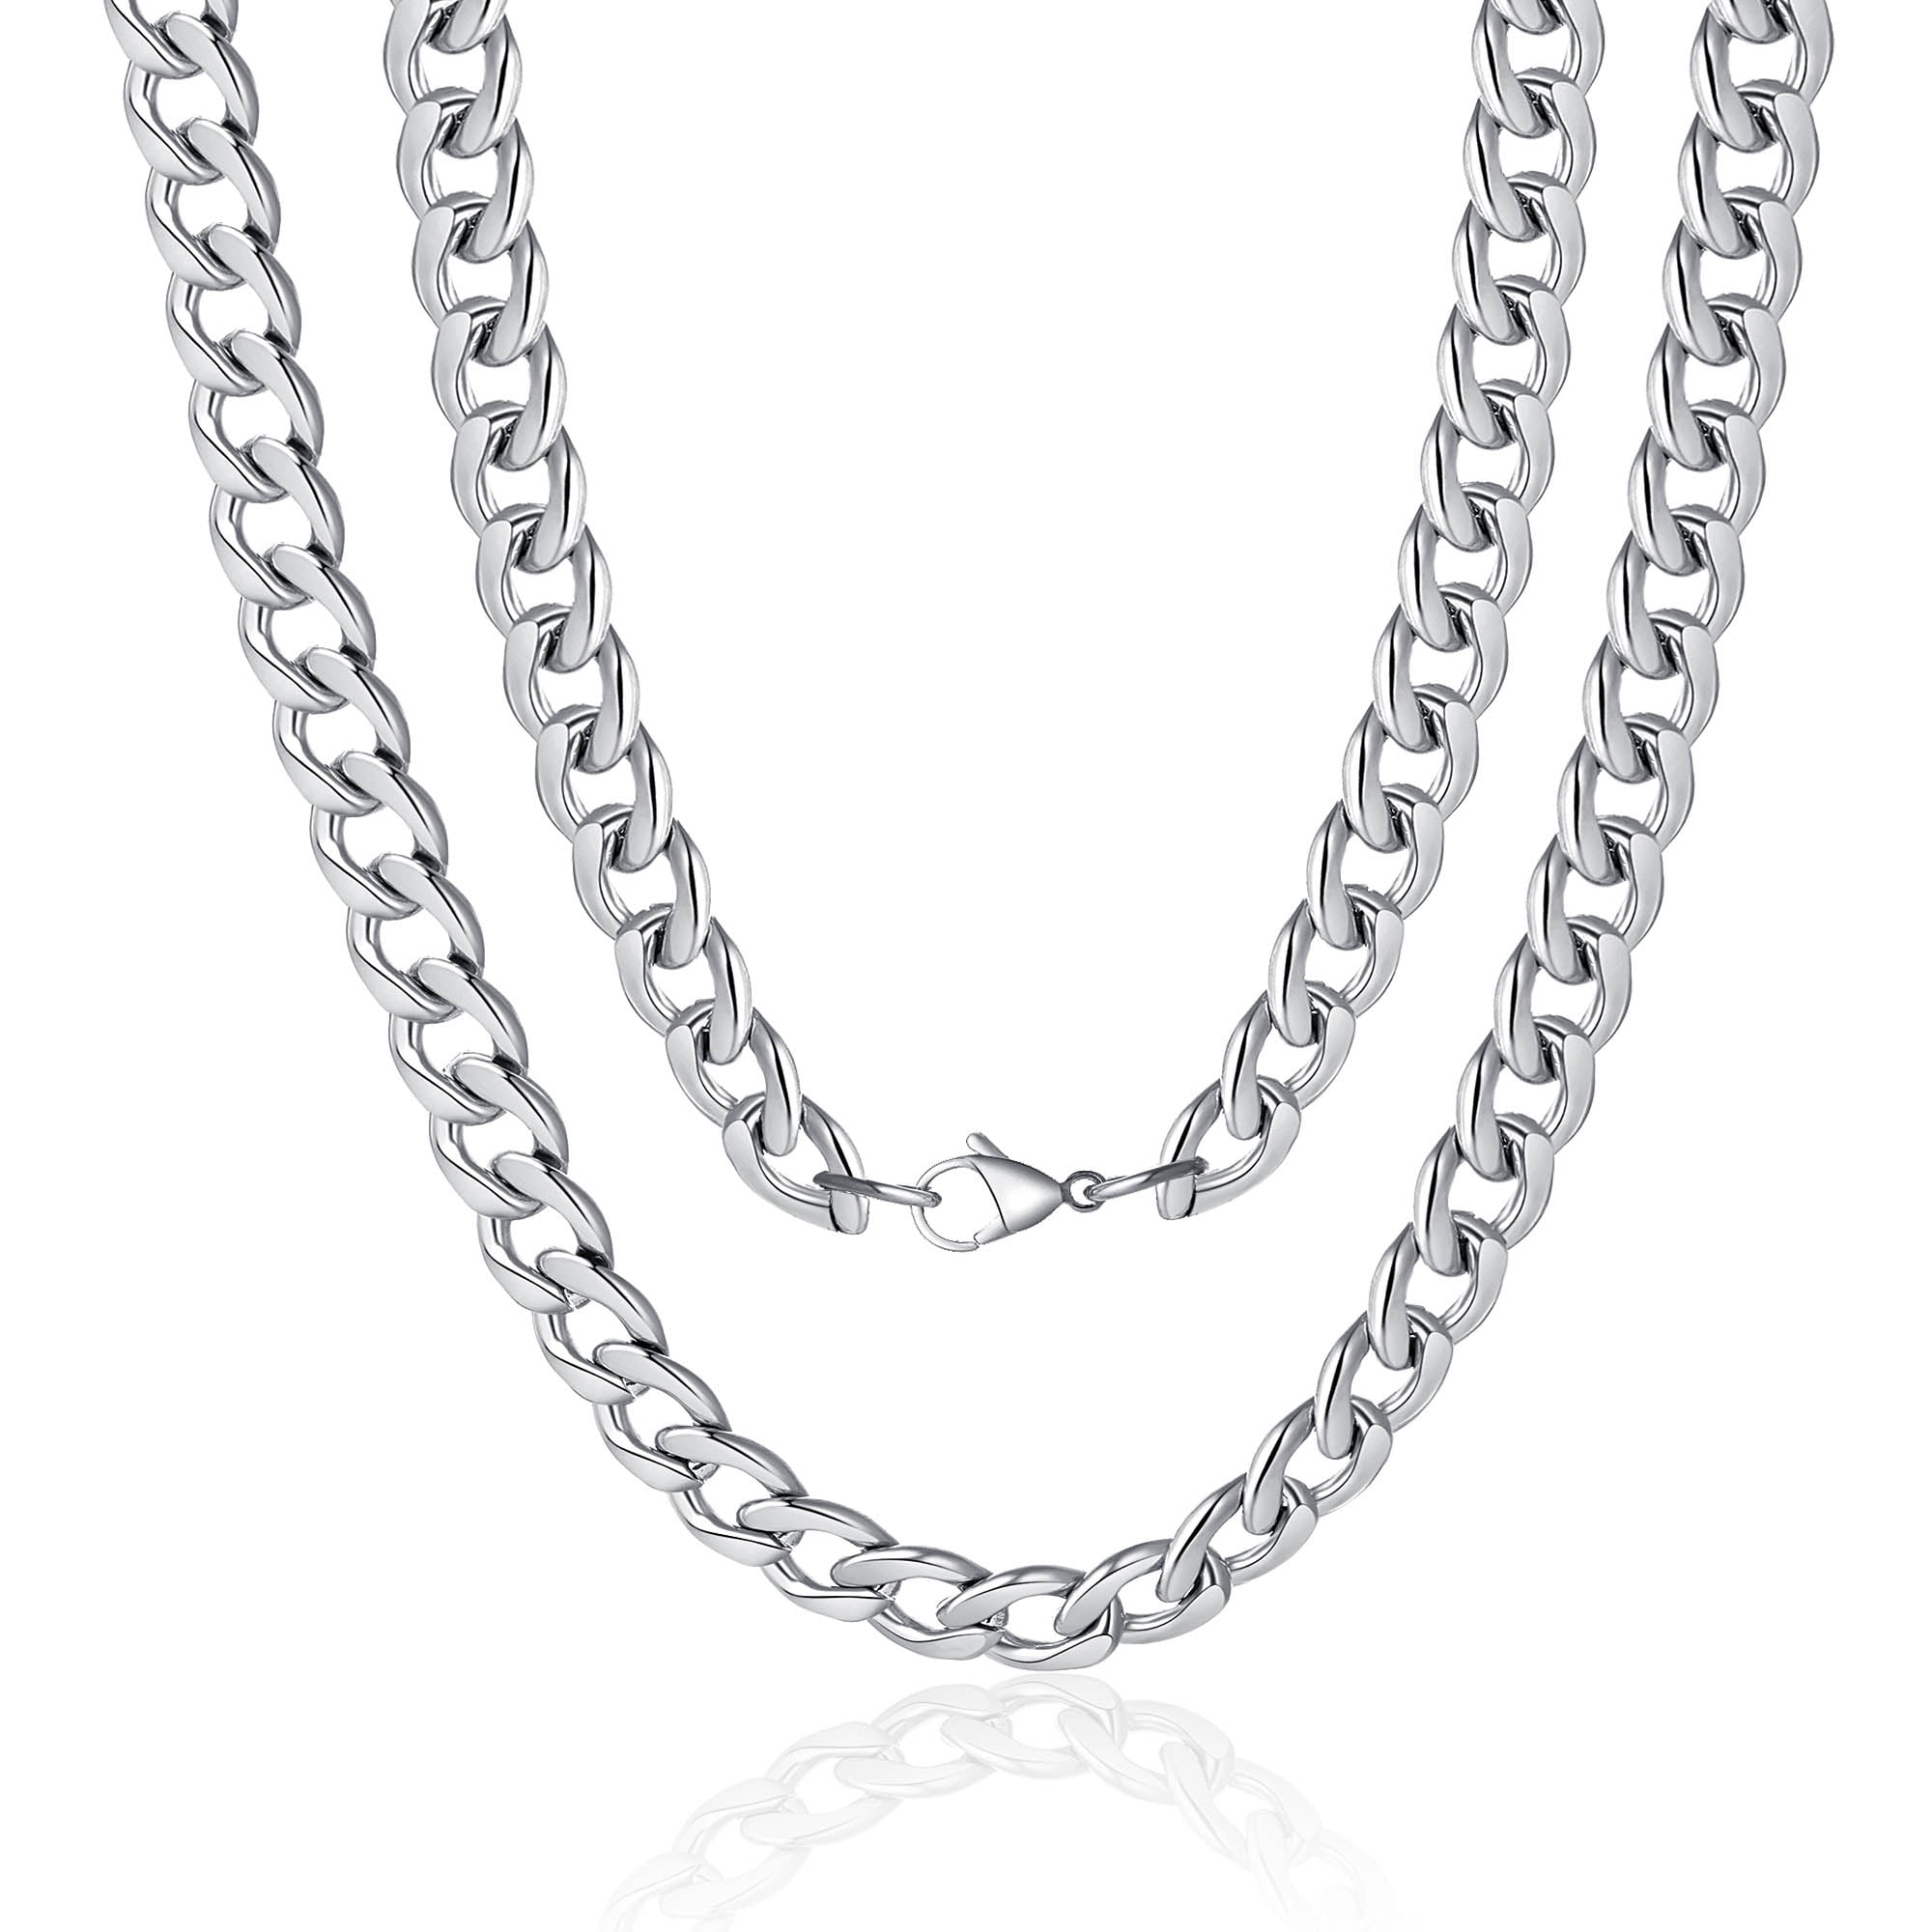 316L Stainless Steel Popular Men Chain Link Necklace Silver 3-12mm 18" 36" 